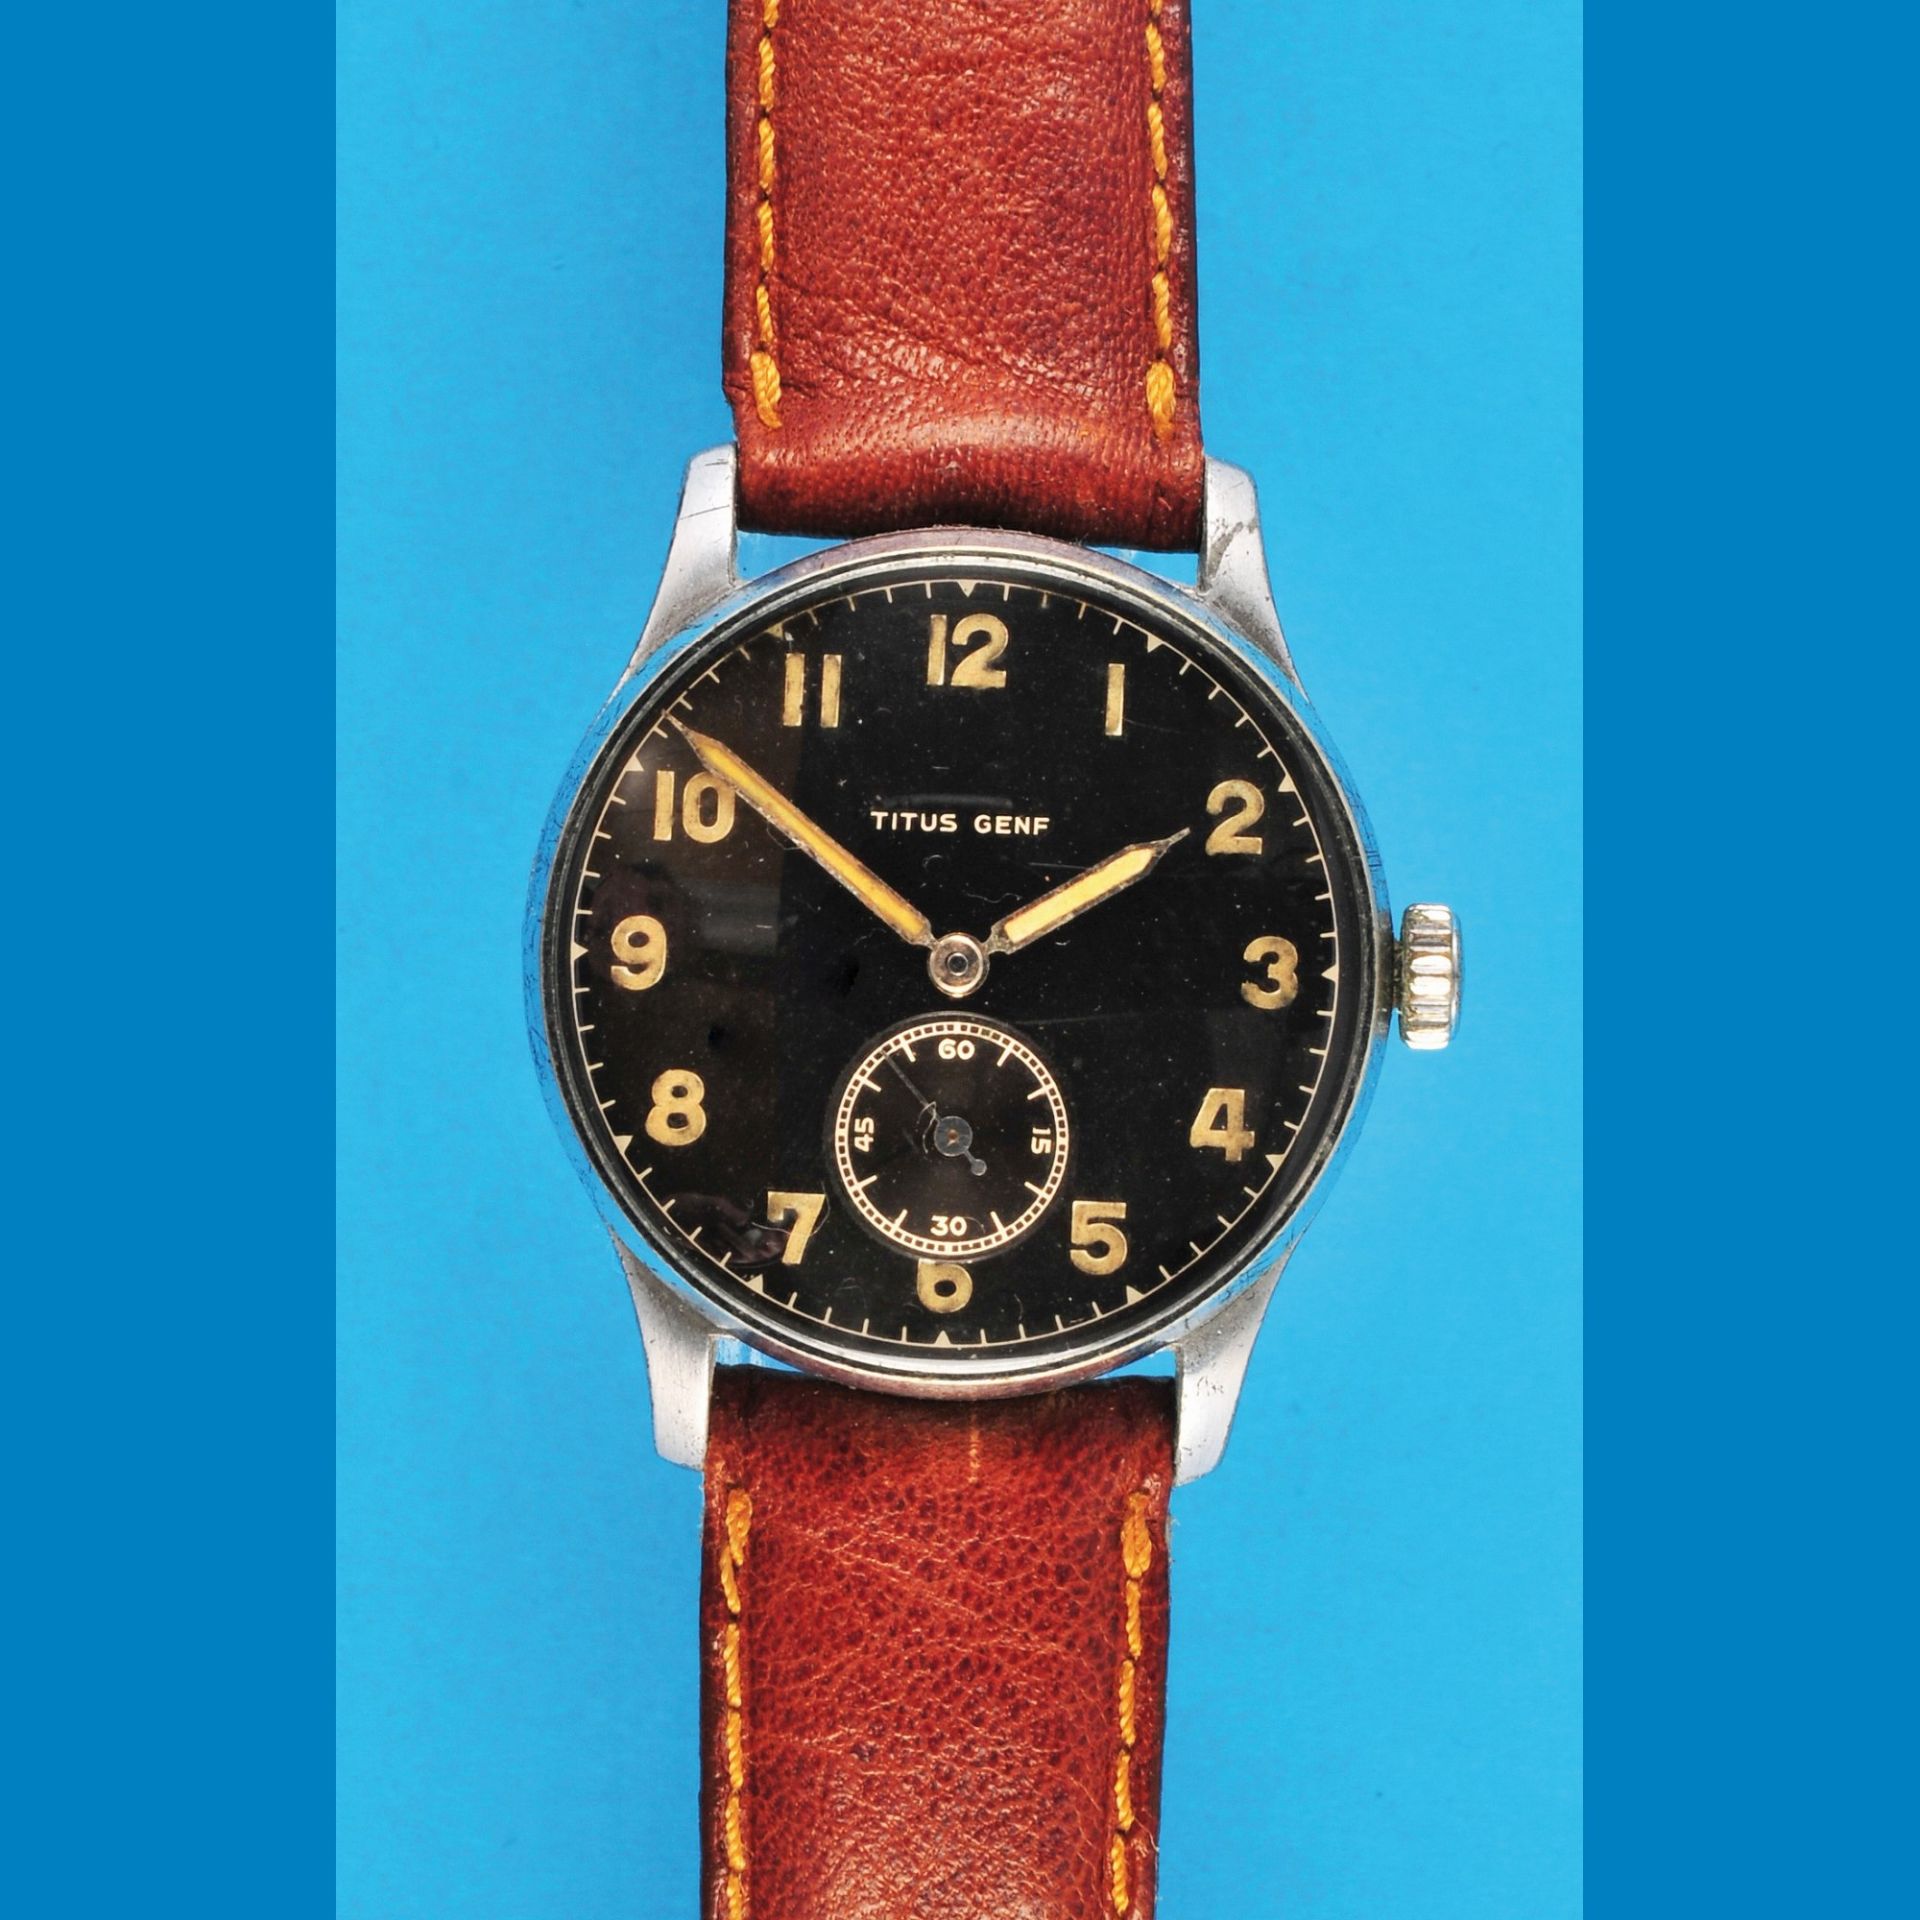 Titus Genf official wristwatch